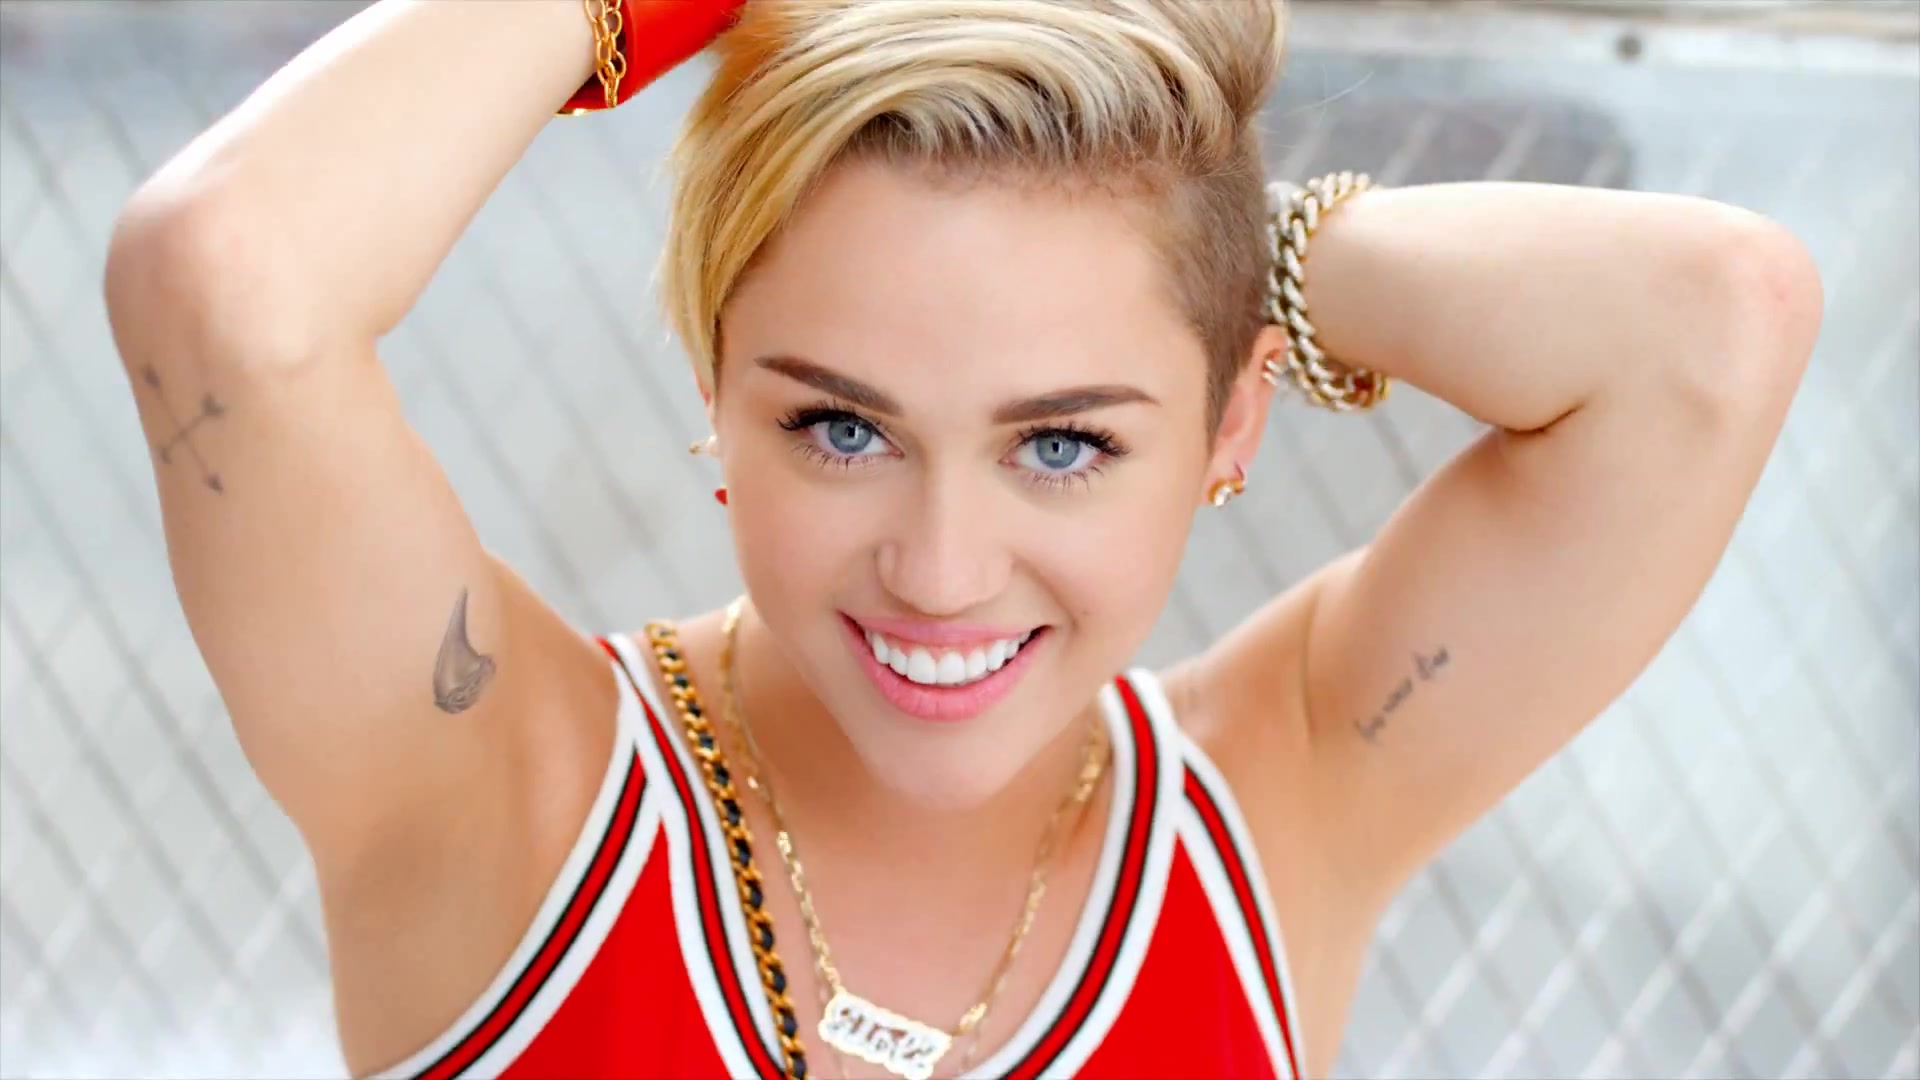 Miley Cyrus hottest pic